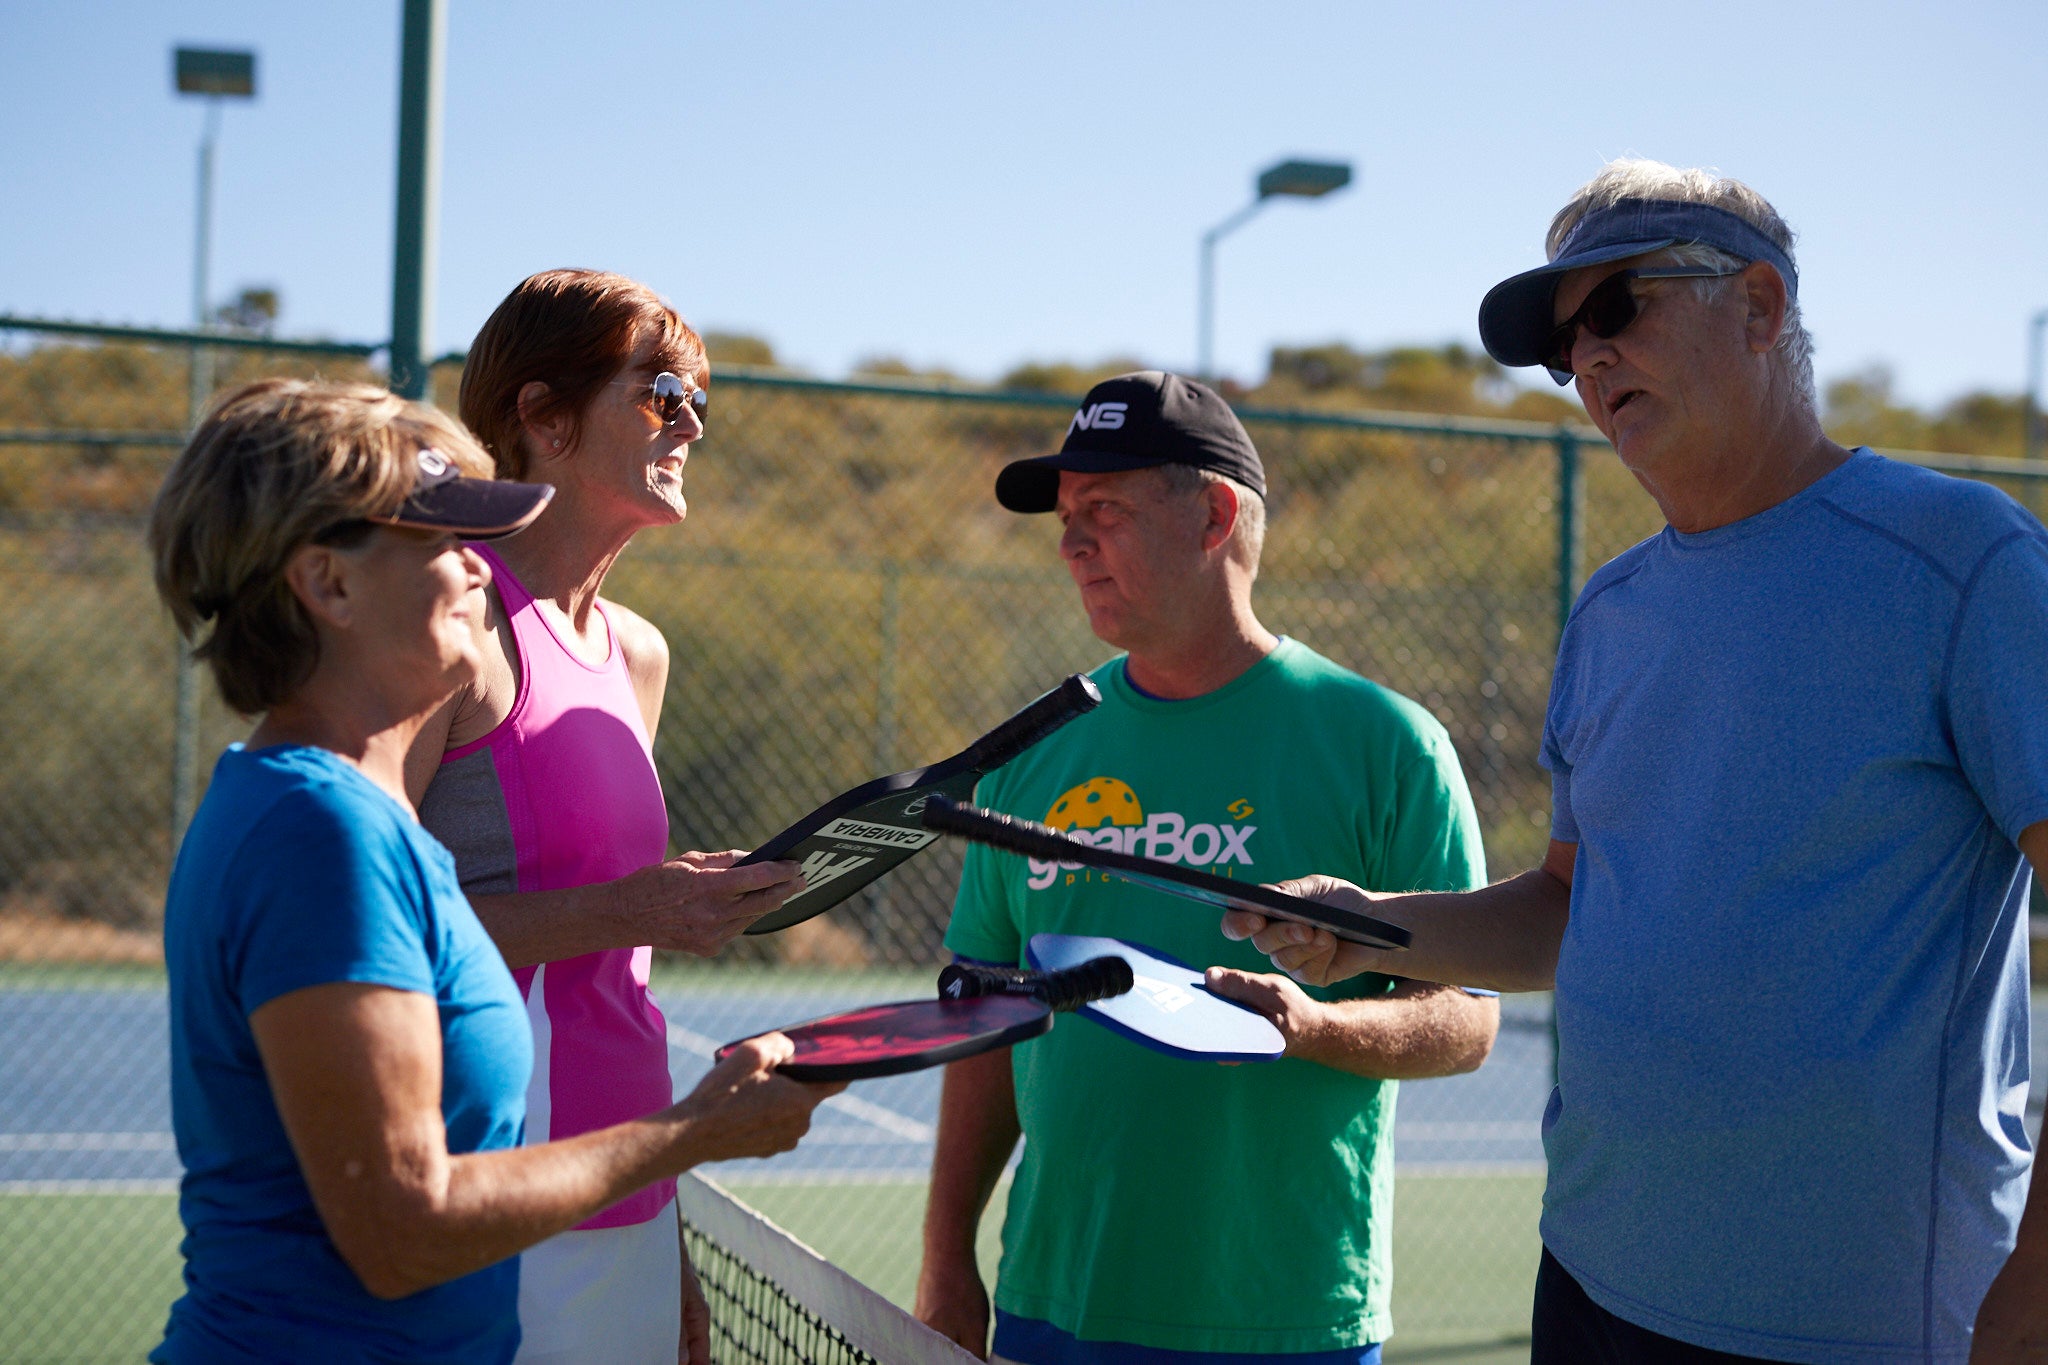 25 Pickleball Terms You Need to Know Before Playing Your First Game